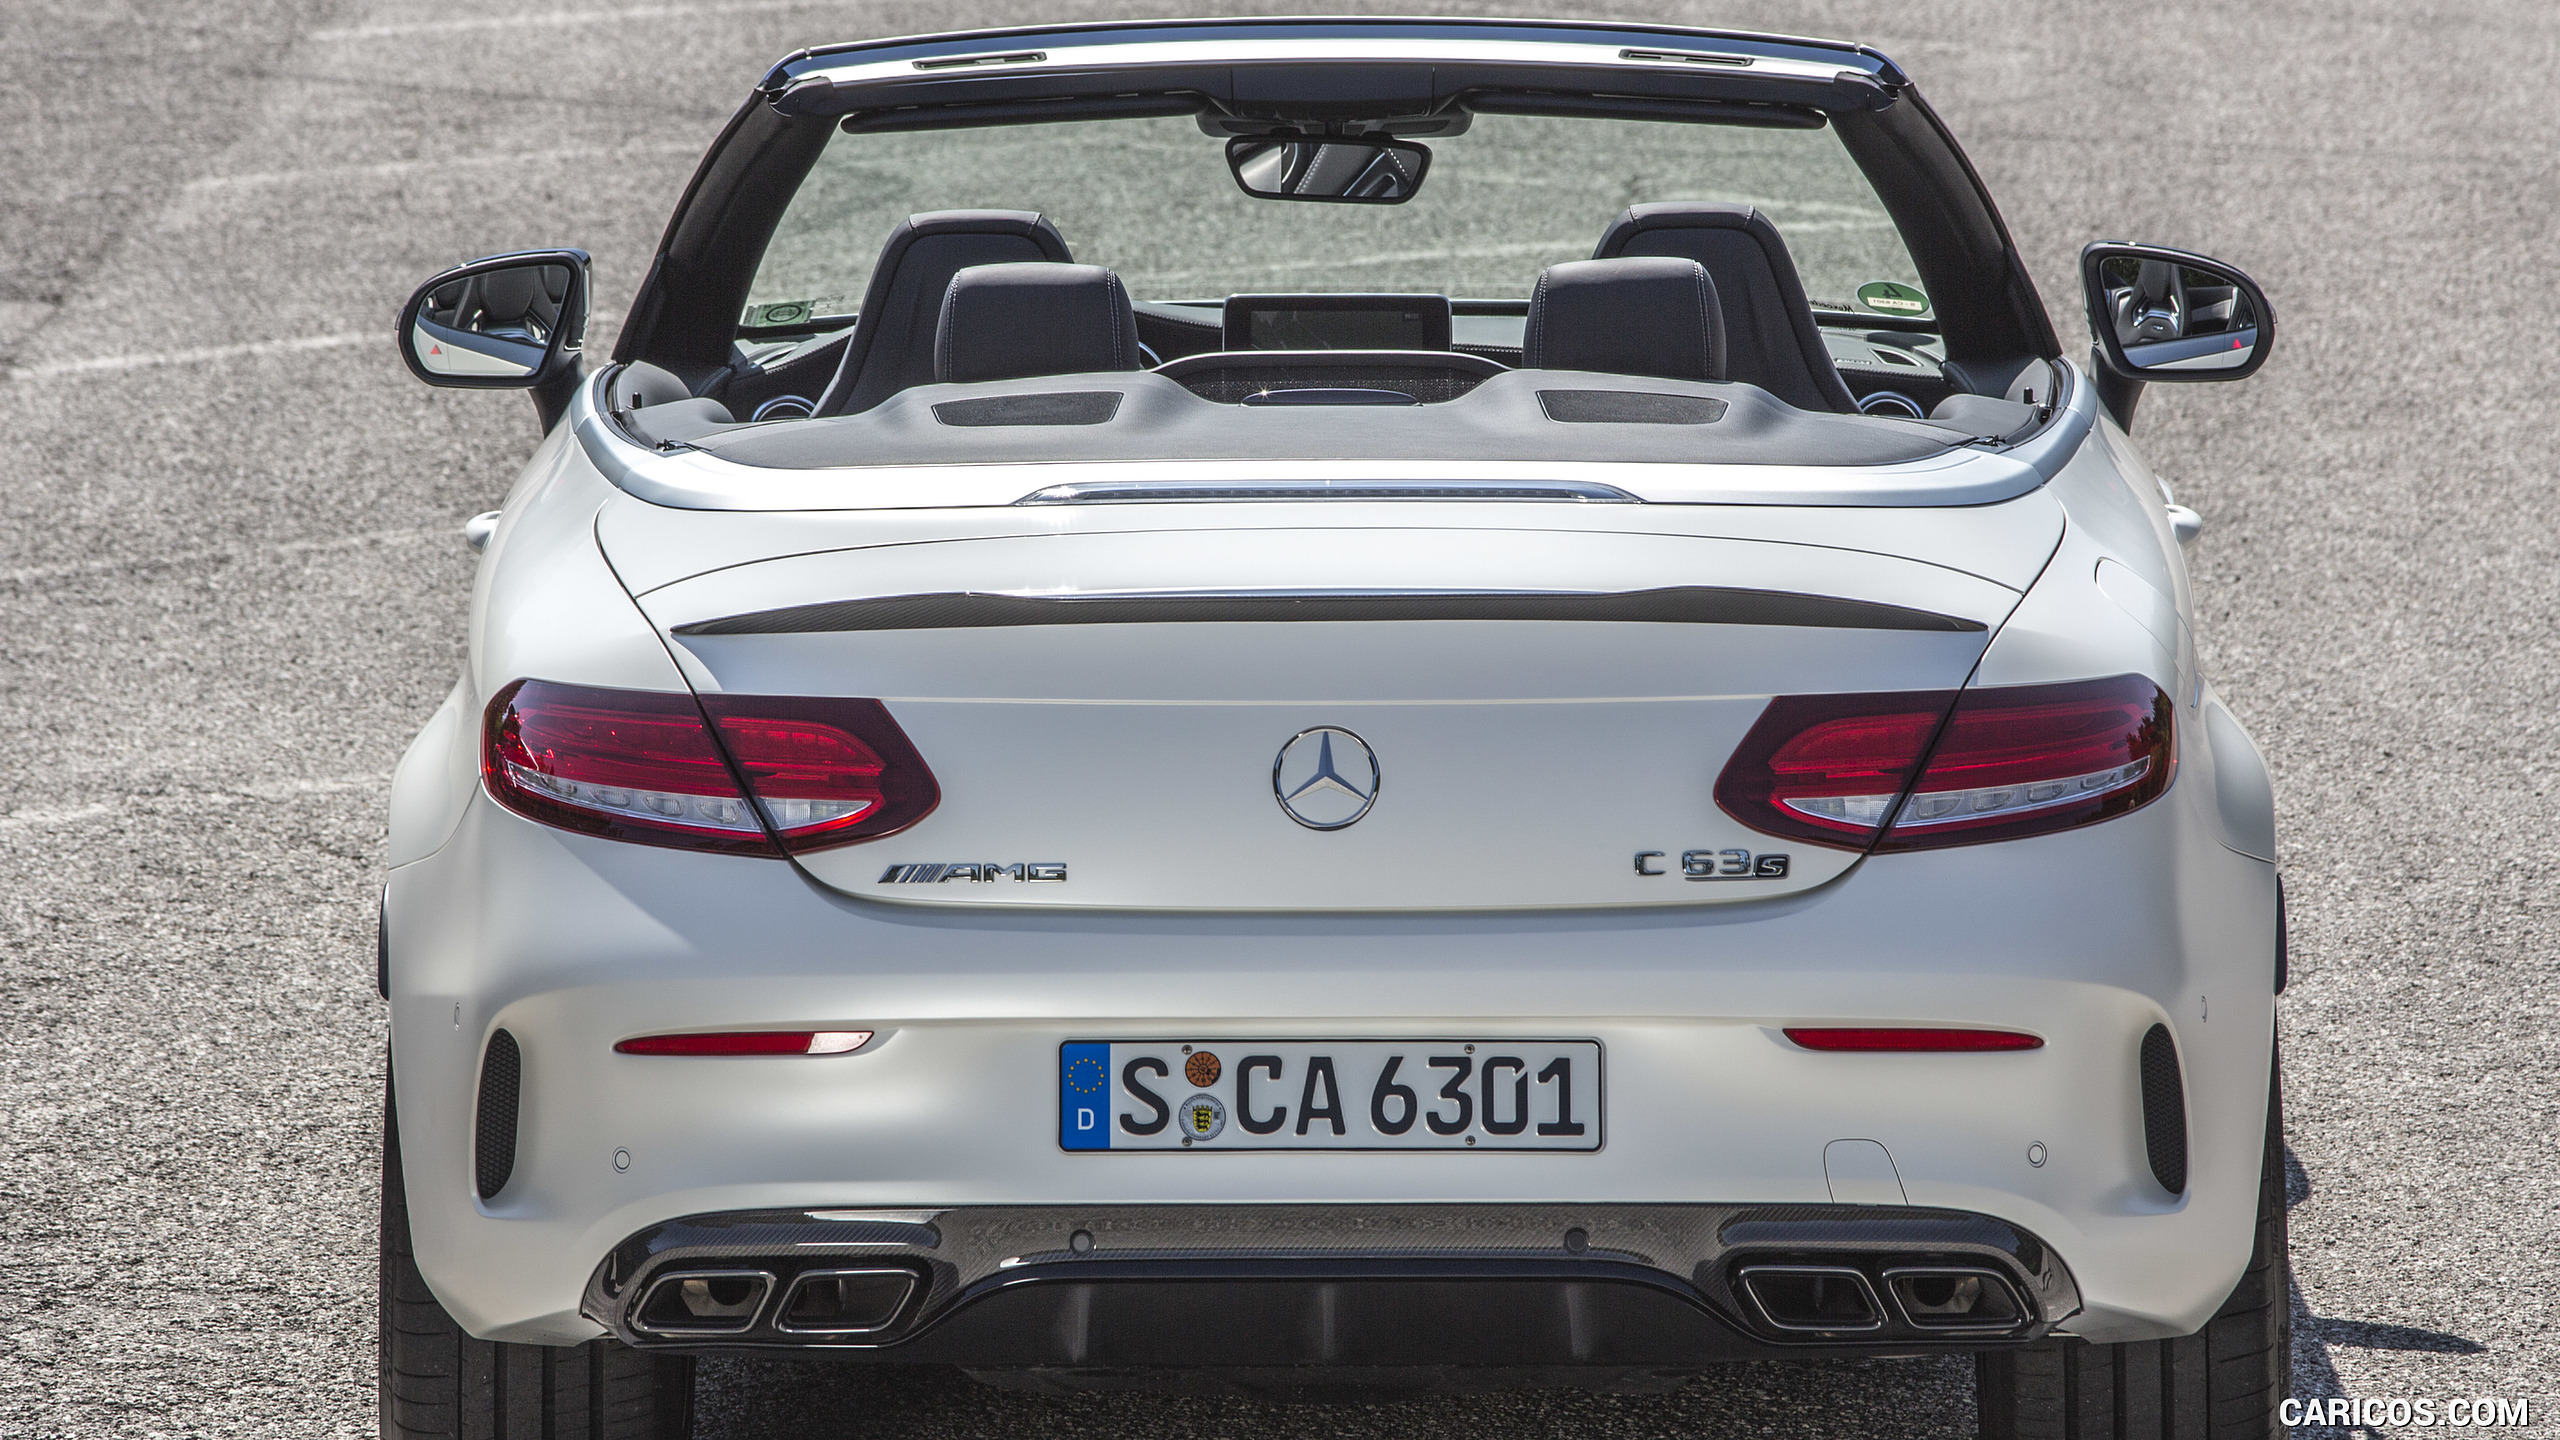 2017 Mercedes-AMG C63 S Cabriolet - Rear, #132 of 222